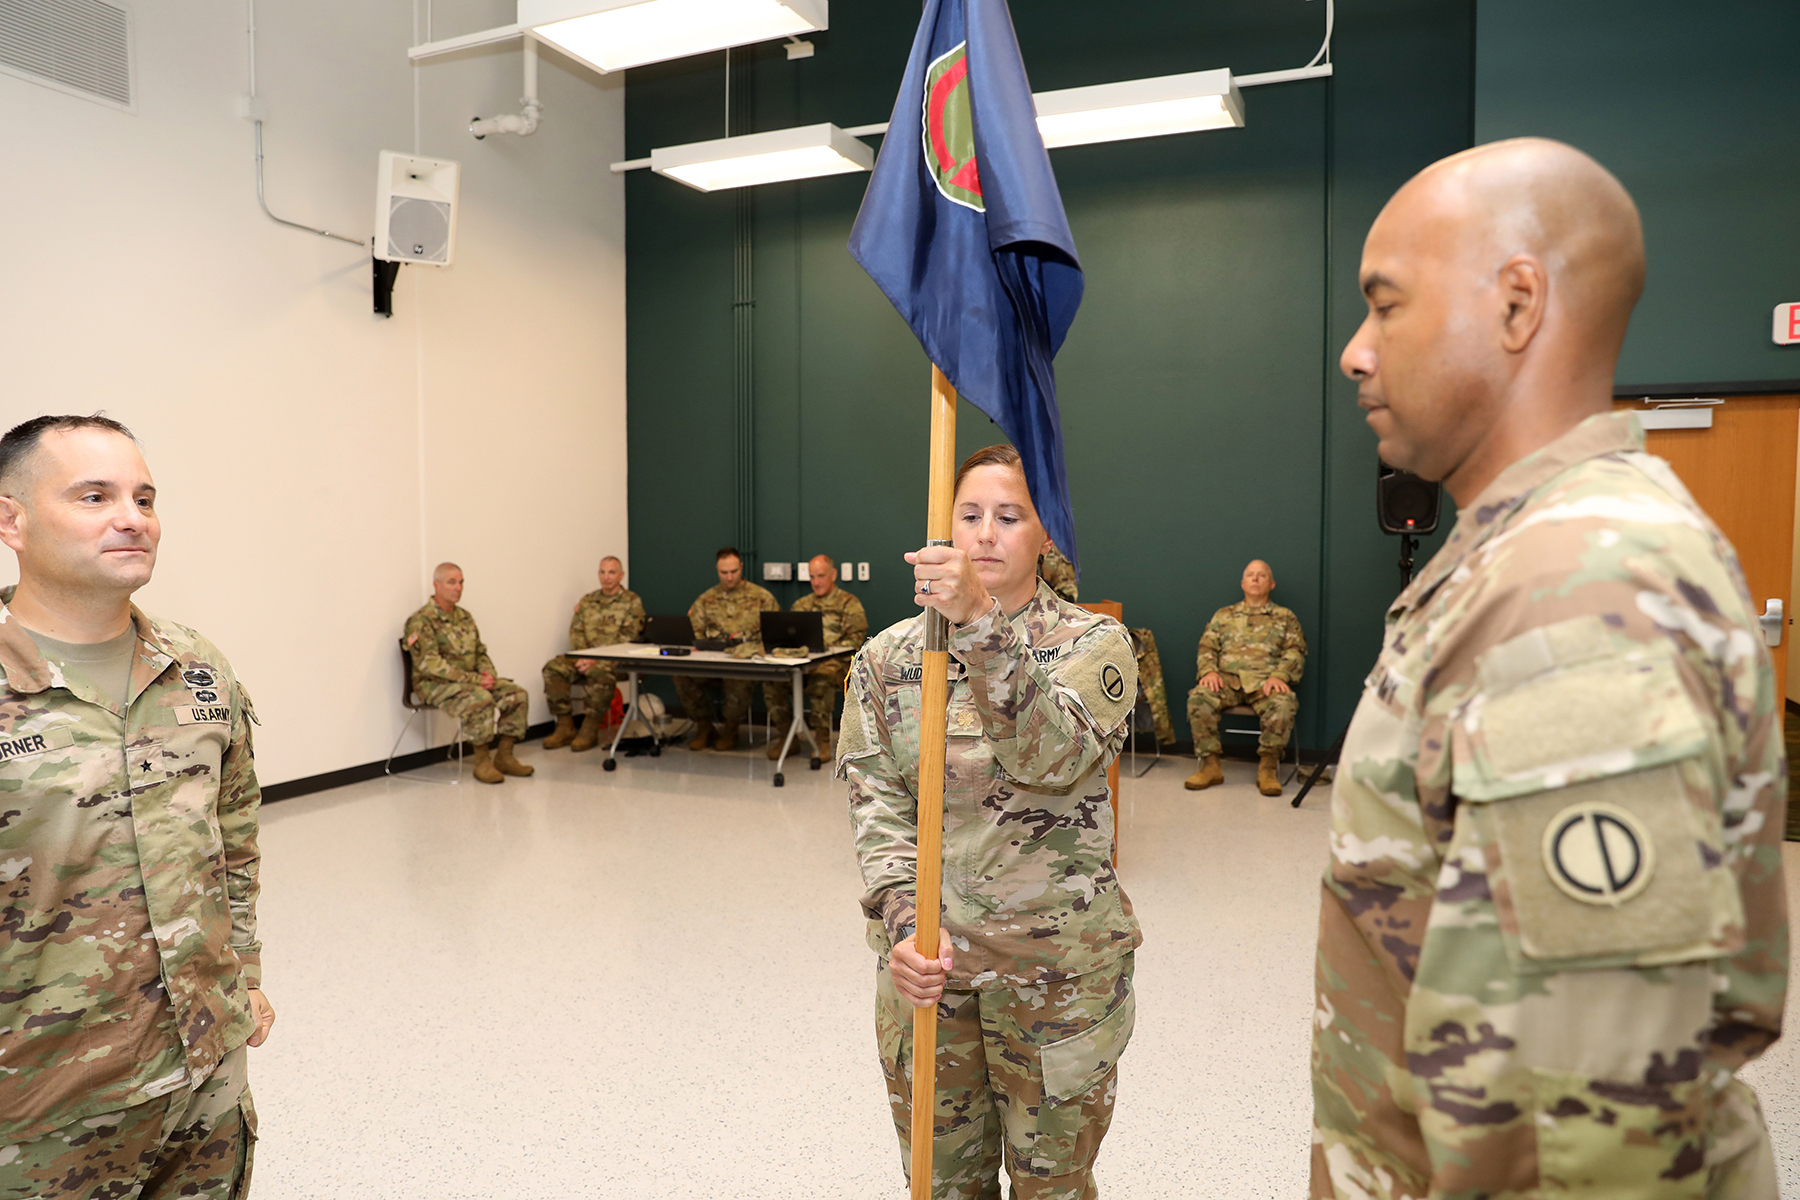 Local service members start new year with a military recognition from  Chicago Blackhawks > U.S. Army Reserve > News-Display